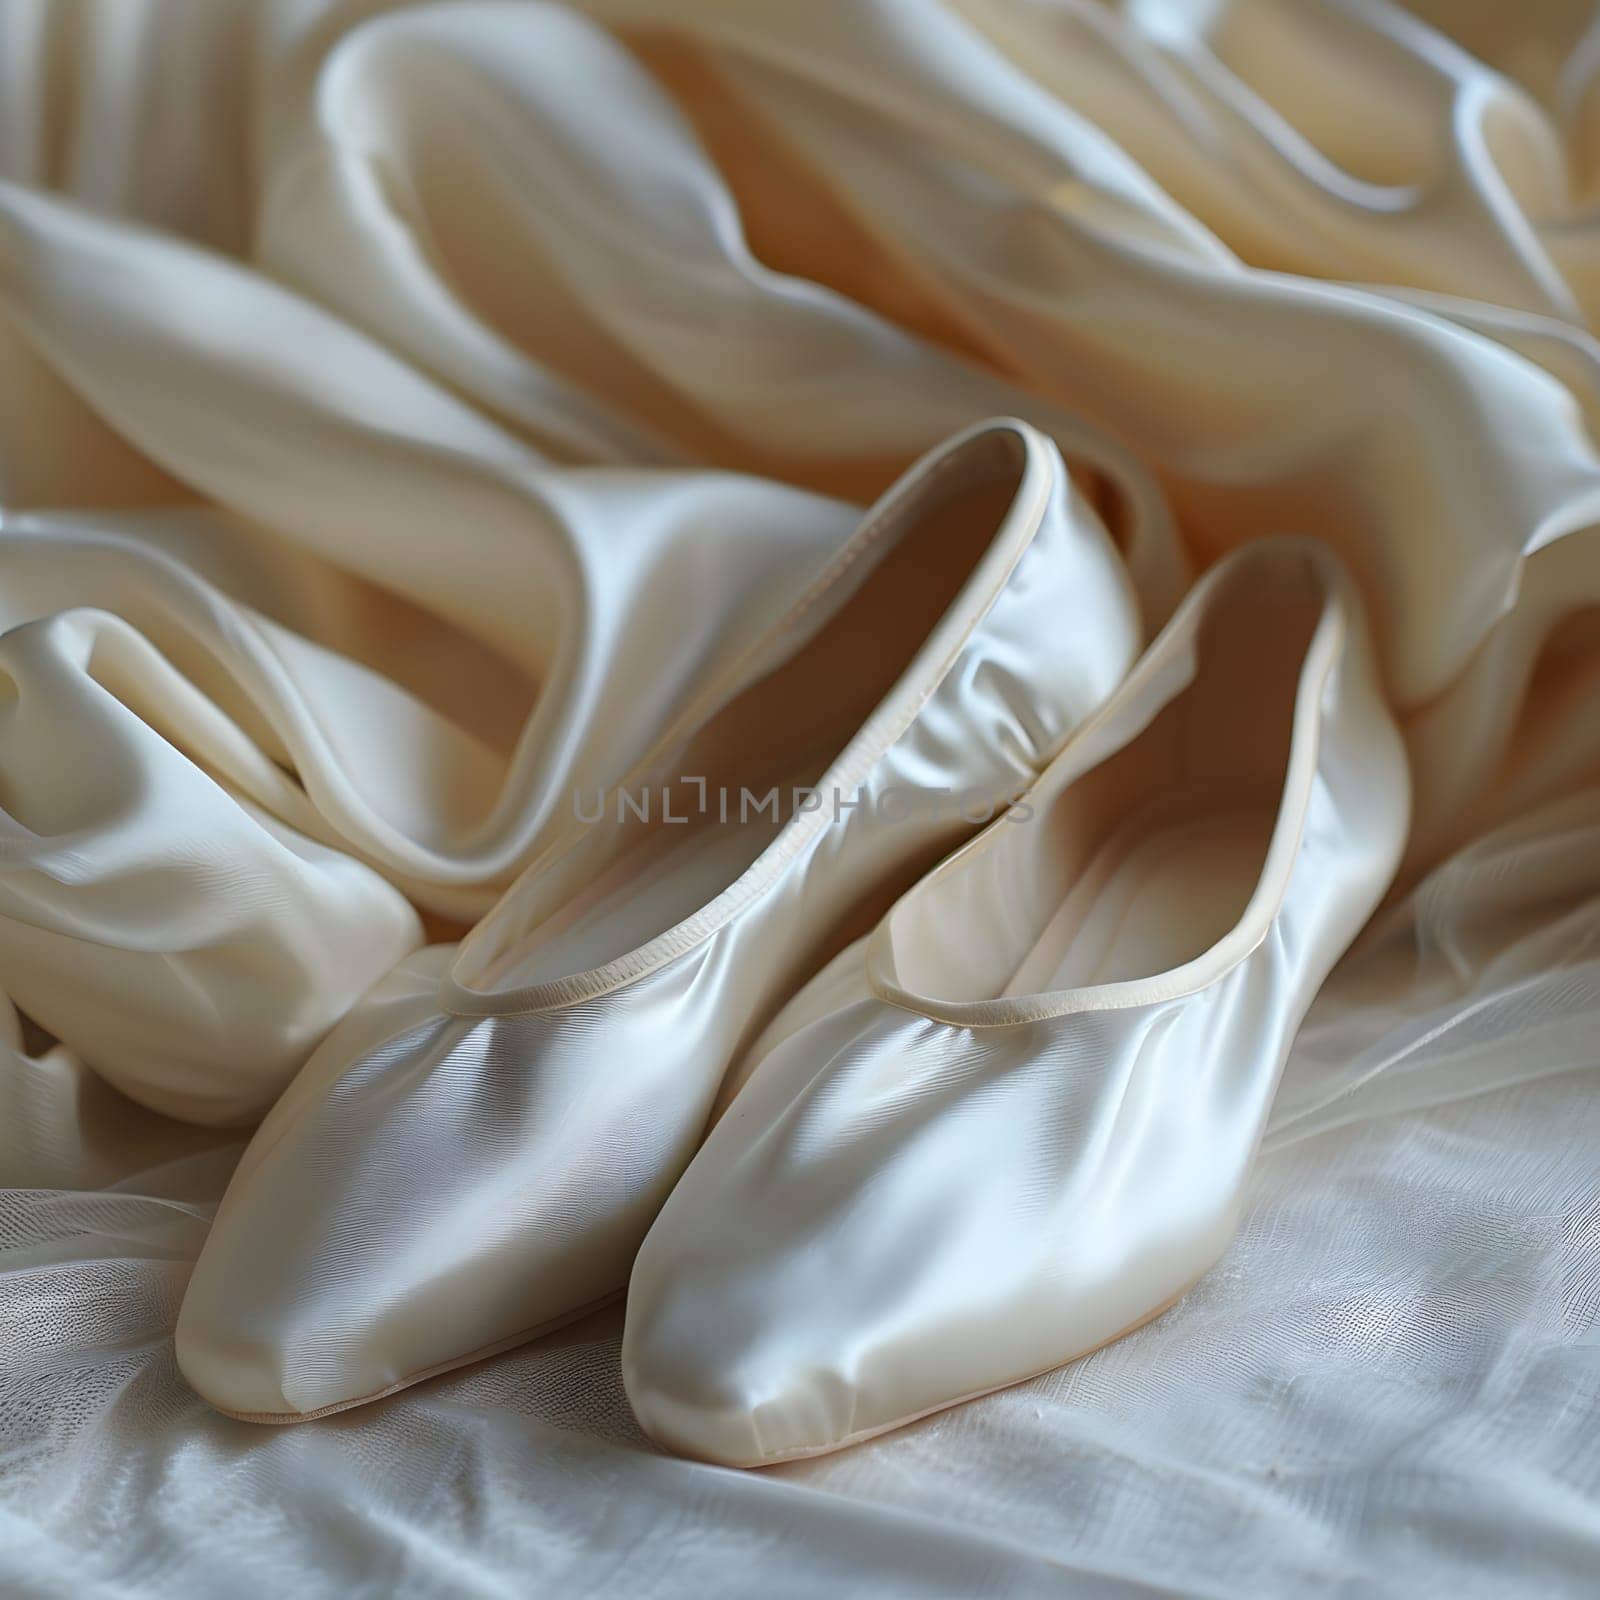 A pair of white ballet shoes rests gracefully on a bed by Nadtochiy